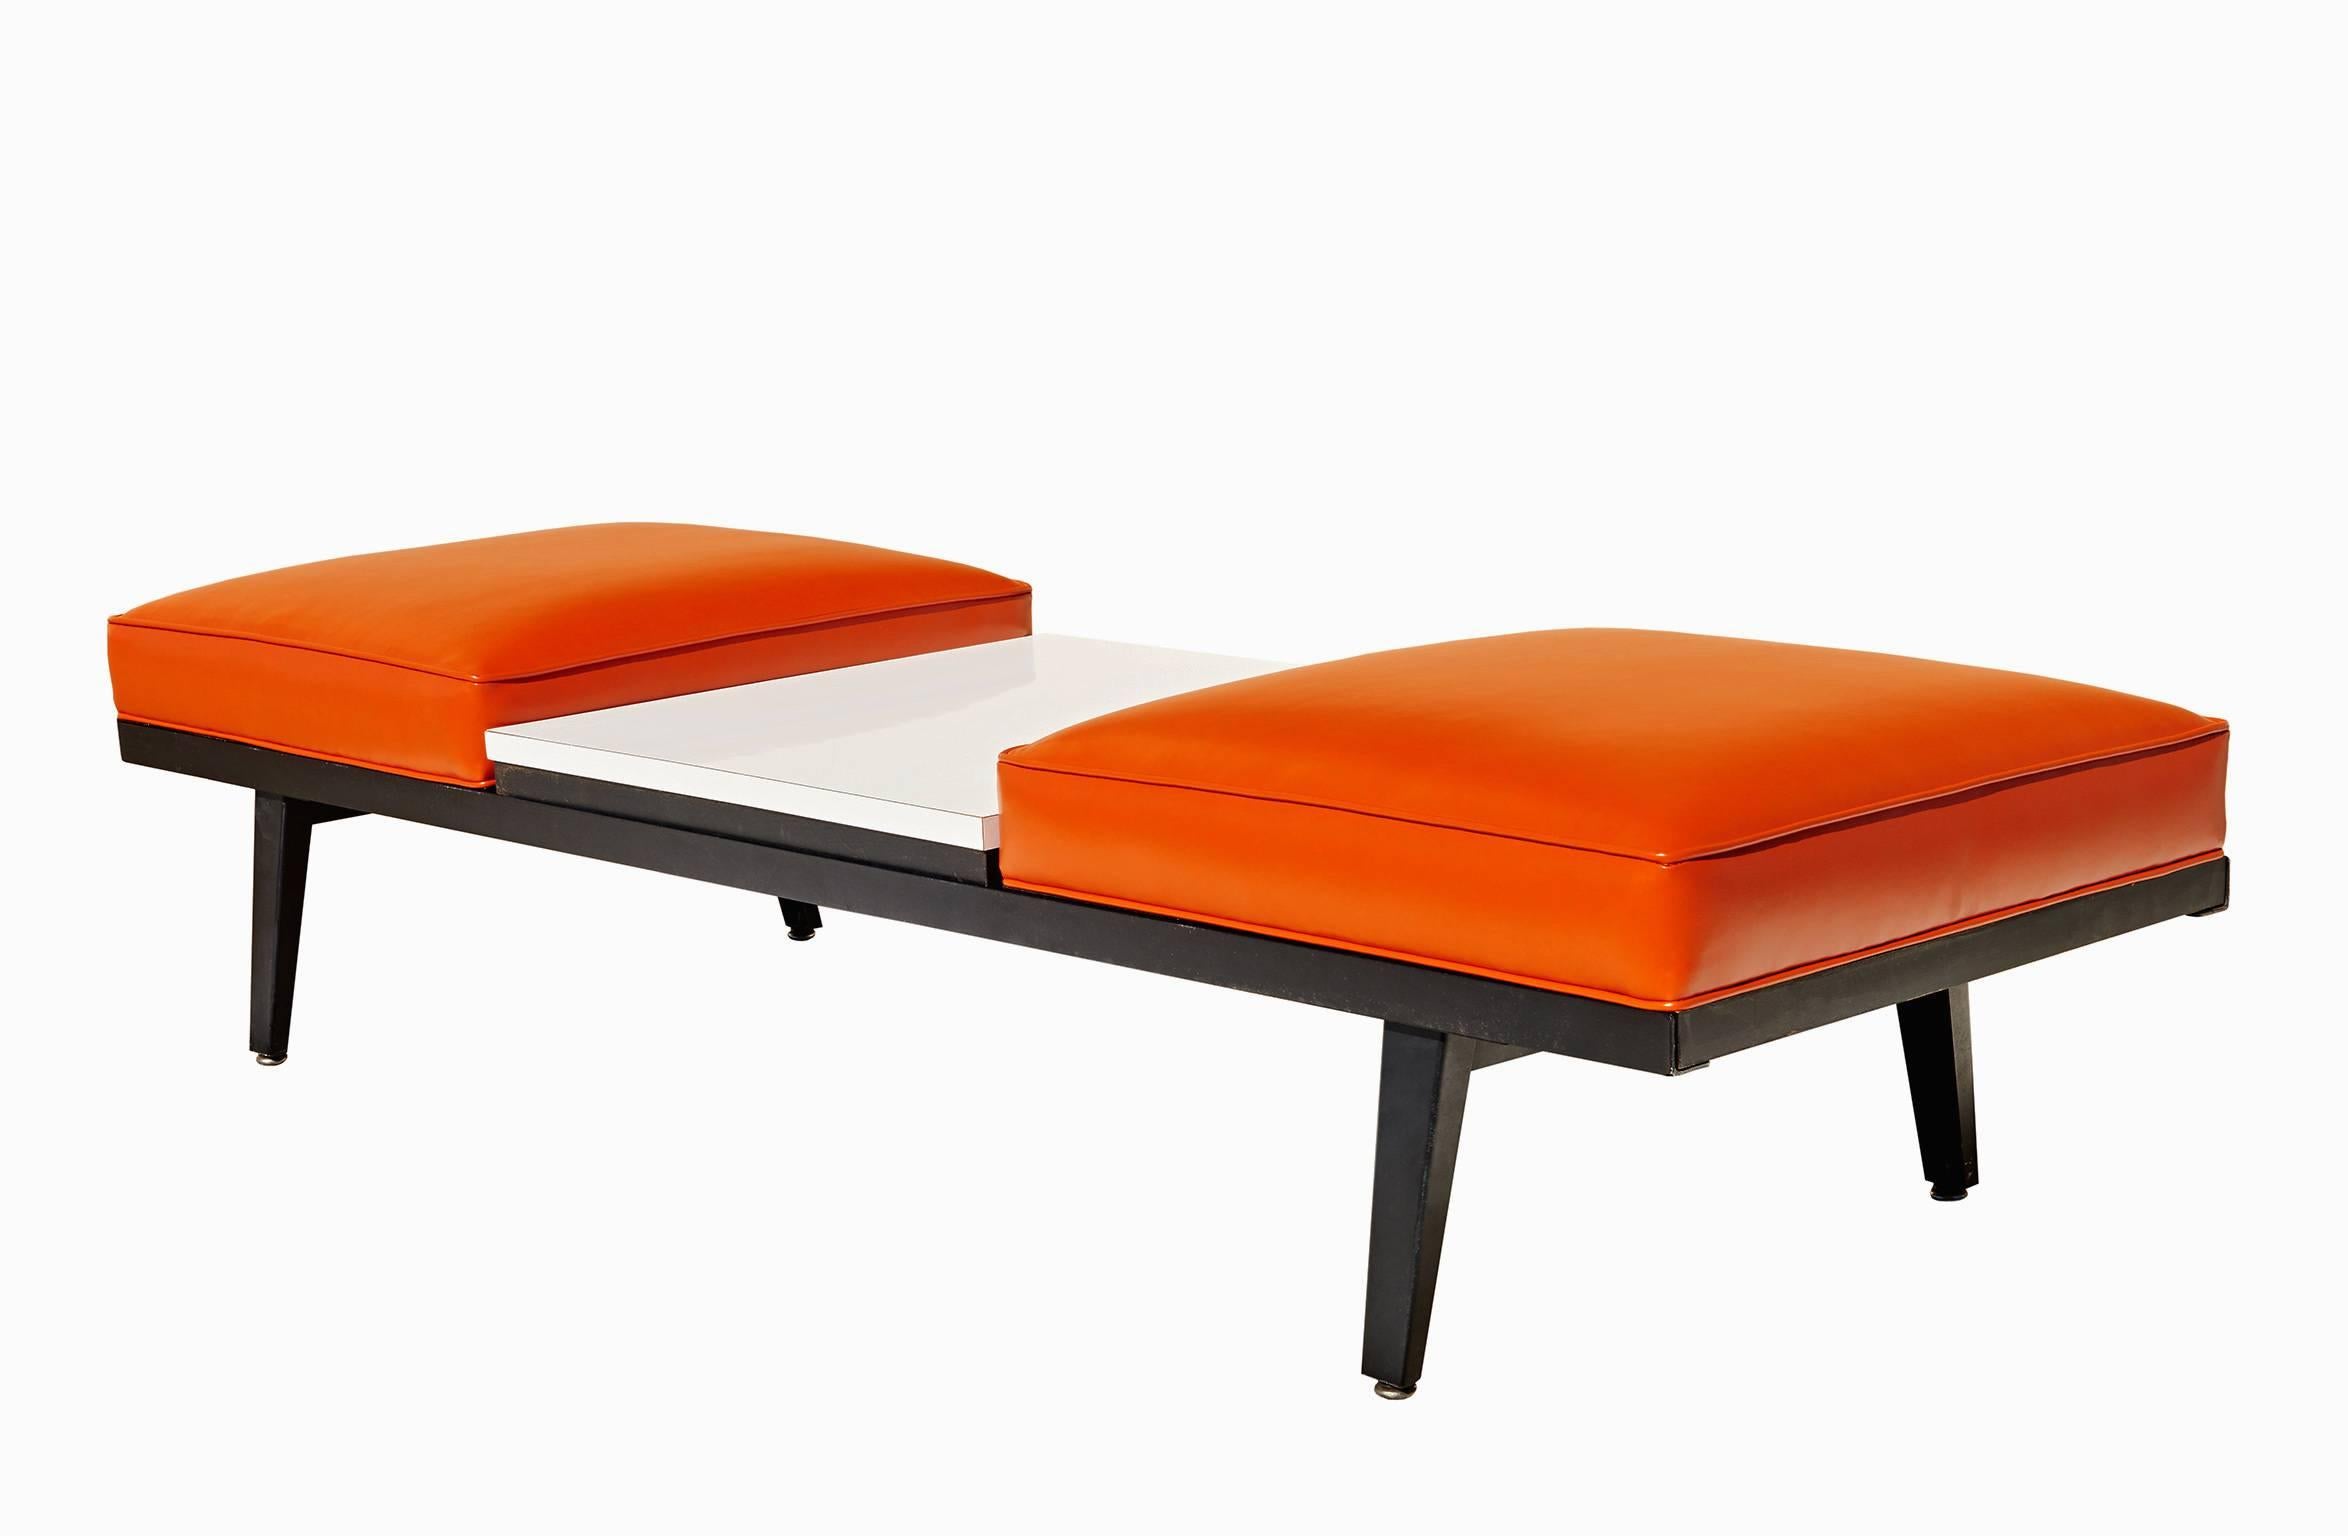 A modular two-place bench, with an integrated coffee table, from George Nelson's 